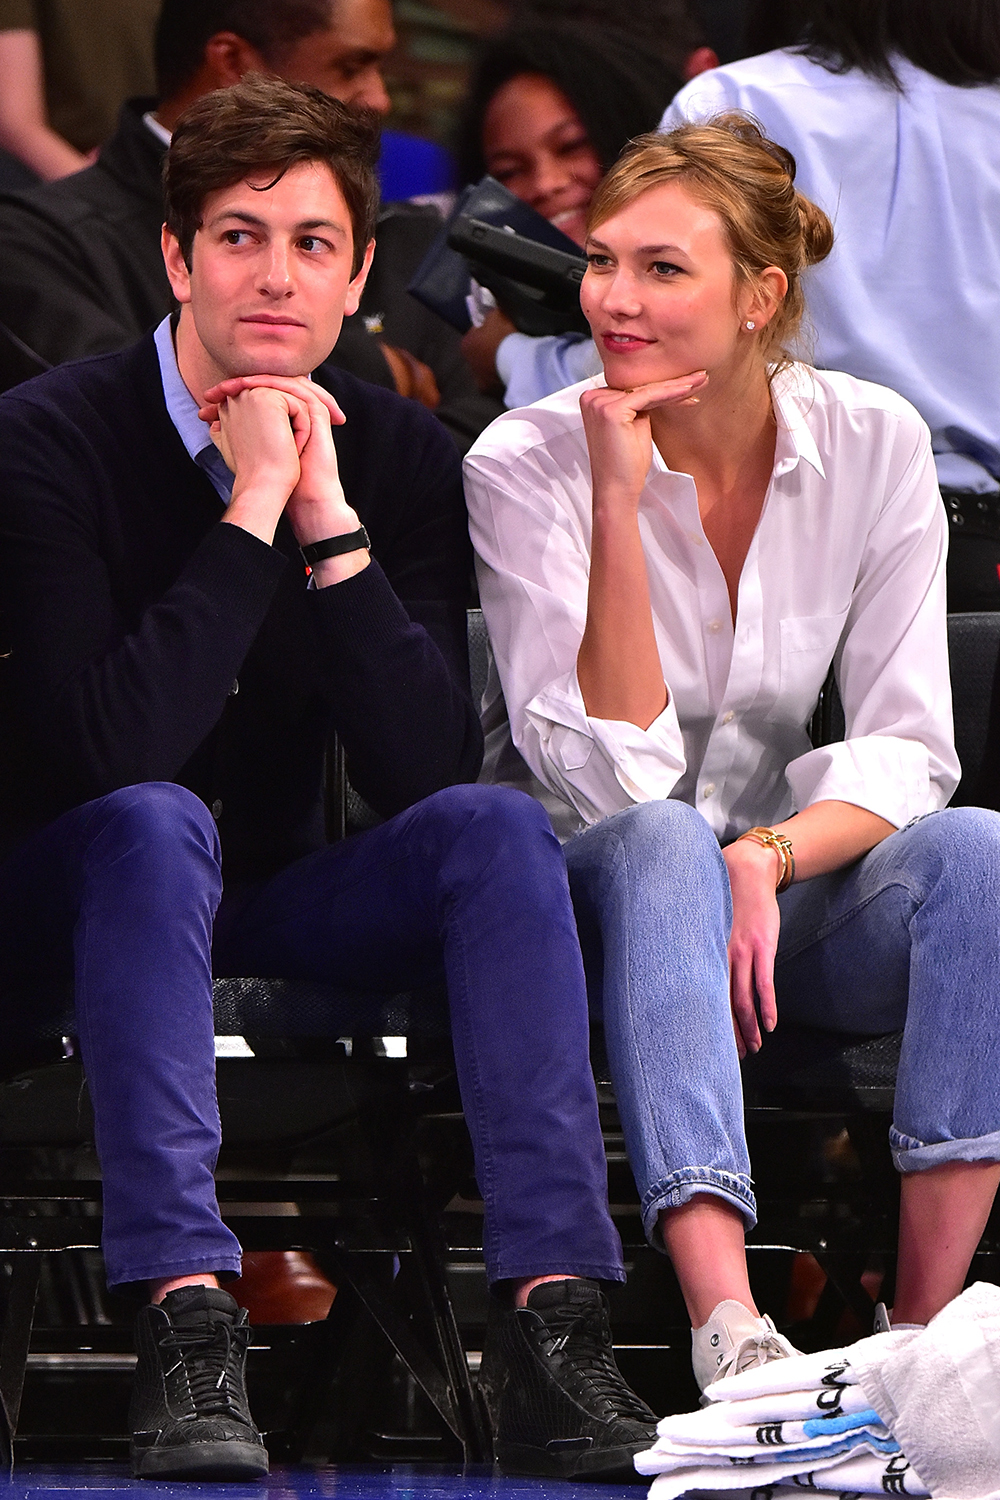 American supermodel Karlie Kloss has enjoyed a relationship with Joshua Kushner (Ivanka Trump's brother-in-law) since 2012.